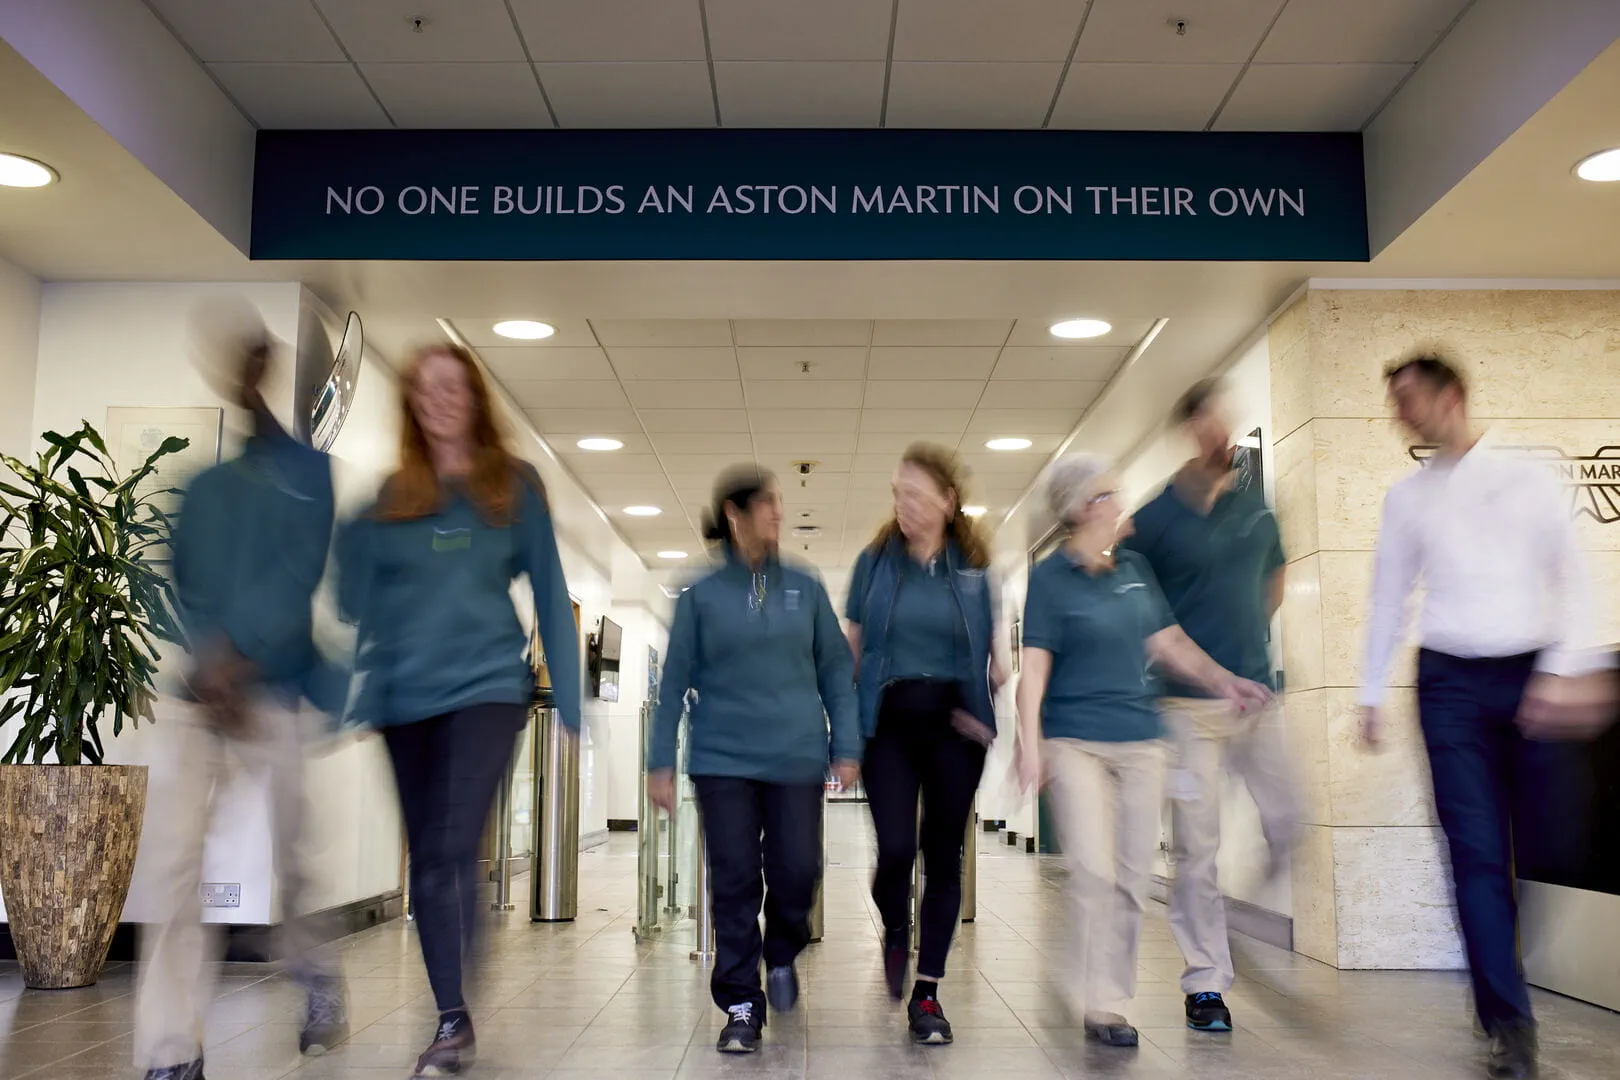 Aston Martin announces a two-year agreement for 2,500 UK workers, including a 4% annual pay raise, reduced working hours, and a £1,000 bonus to support employee wellbeing amidst rising living costs.